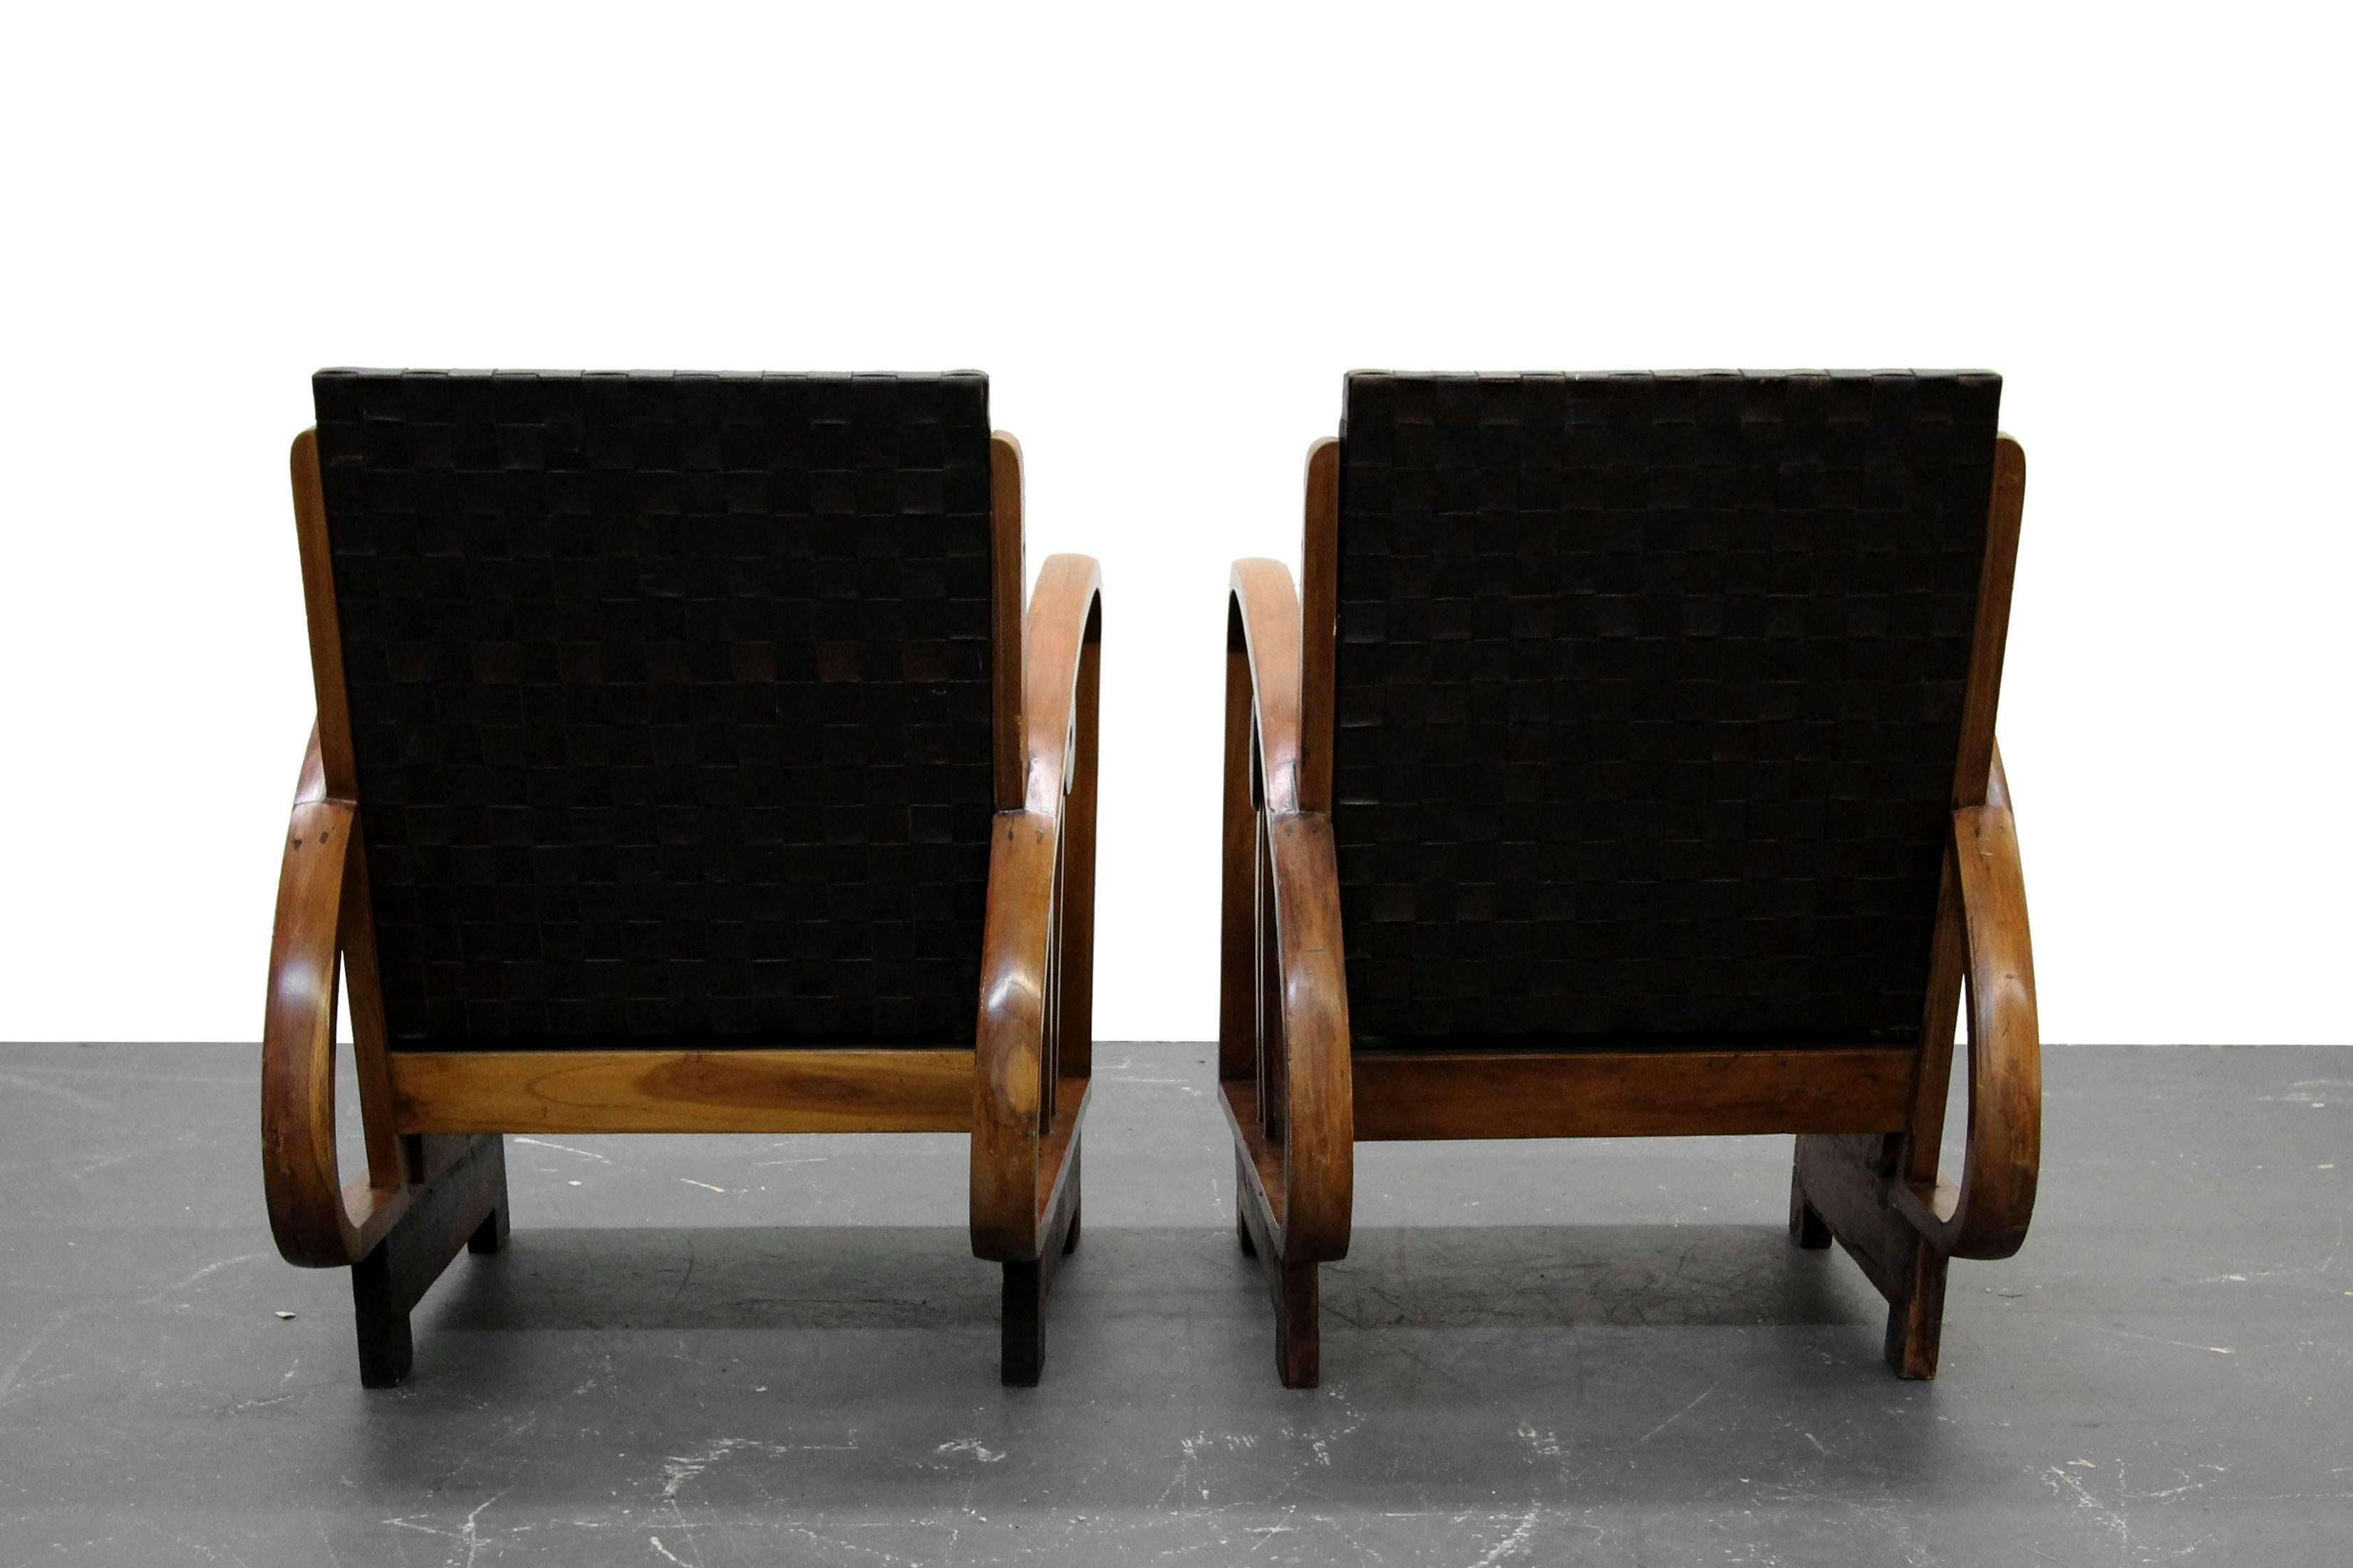 20th Century Pair of Antique French Art Deco Bentwood Lounge Chairs with Woven Leather